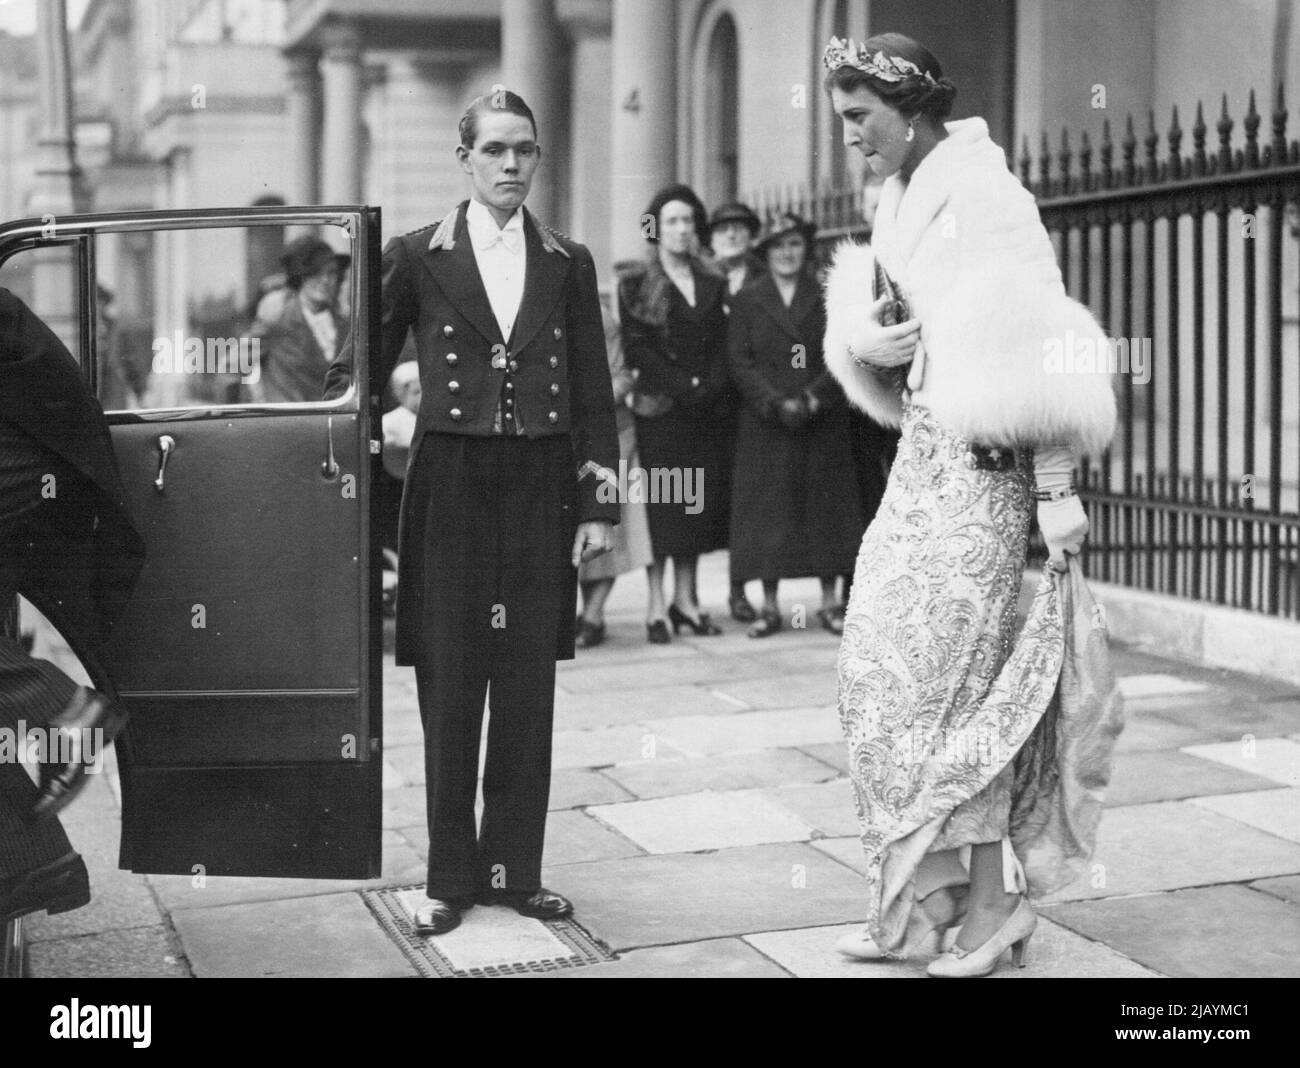 Duchess of Kent Attends State Opening Of Parliament -- The Duchess of Kent leaving Belgrave Square, London, W., for Westminster to attend the opening of Parliament today. The Duchess of Kent today attended the State Opening of the new Session of Parliament by the King today. October 26, 1937. (Photo by Topical Press). Stock Photo